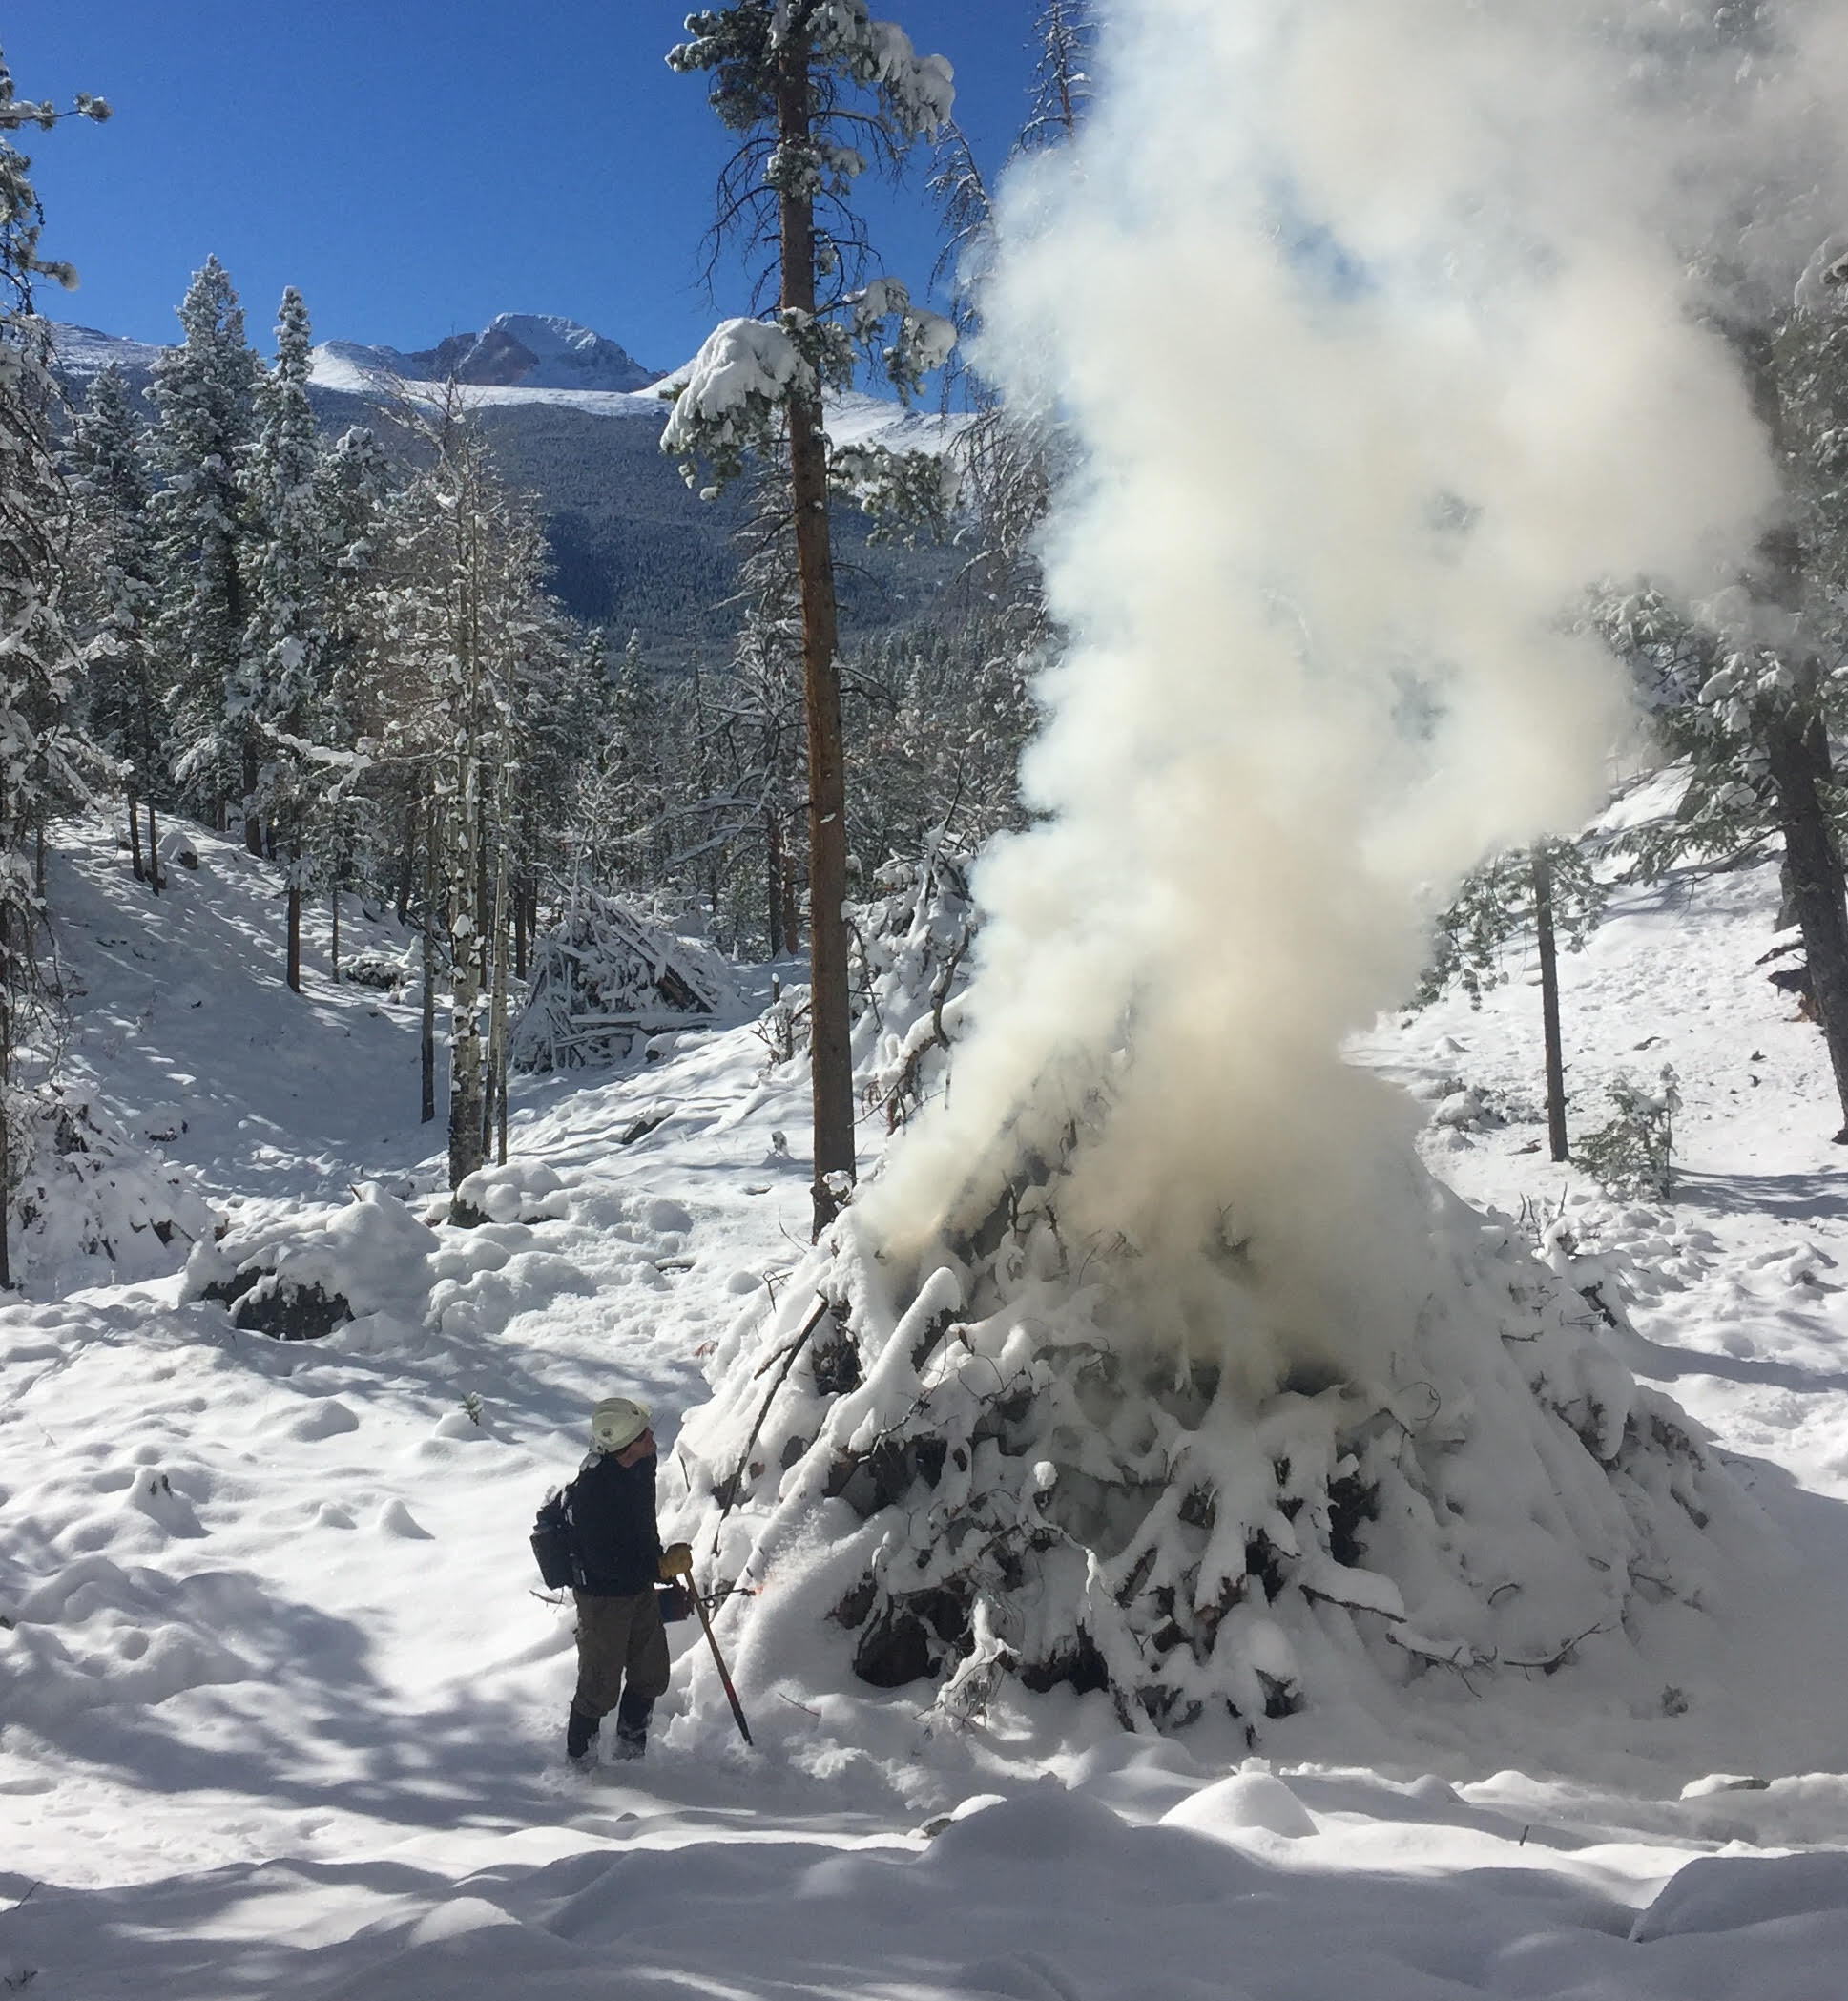 Previous pile burning efforts at Rocky Mountain National Park